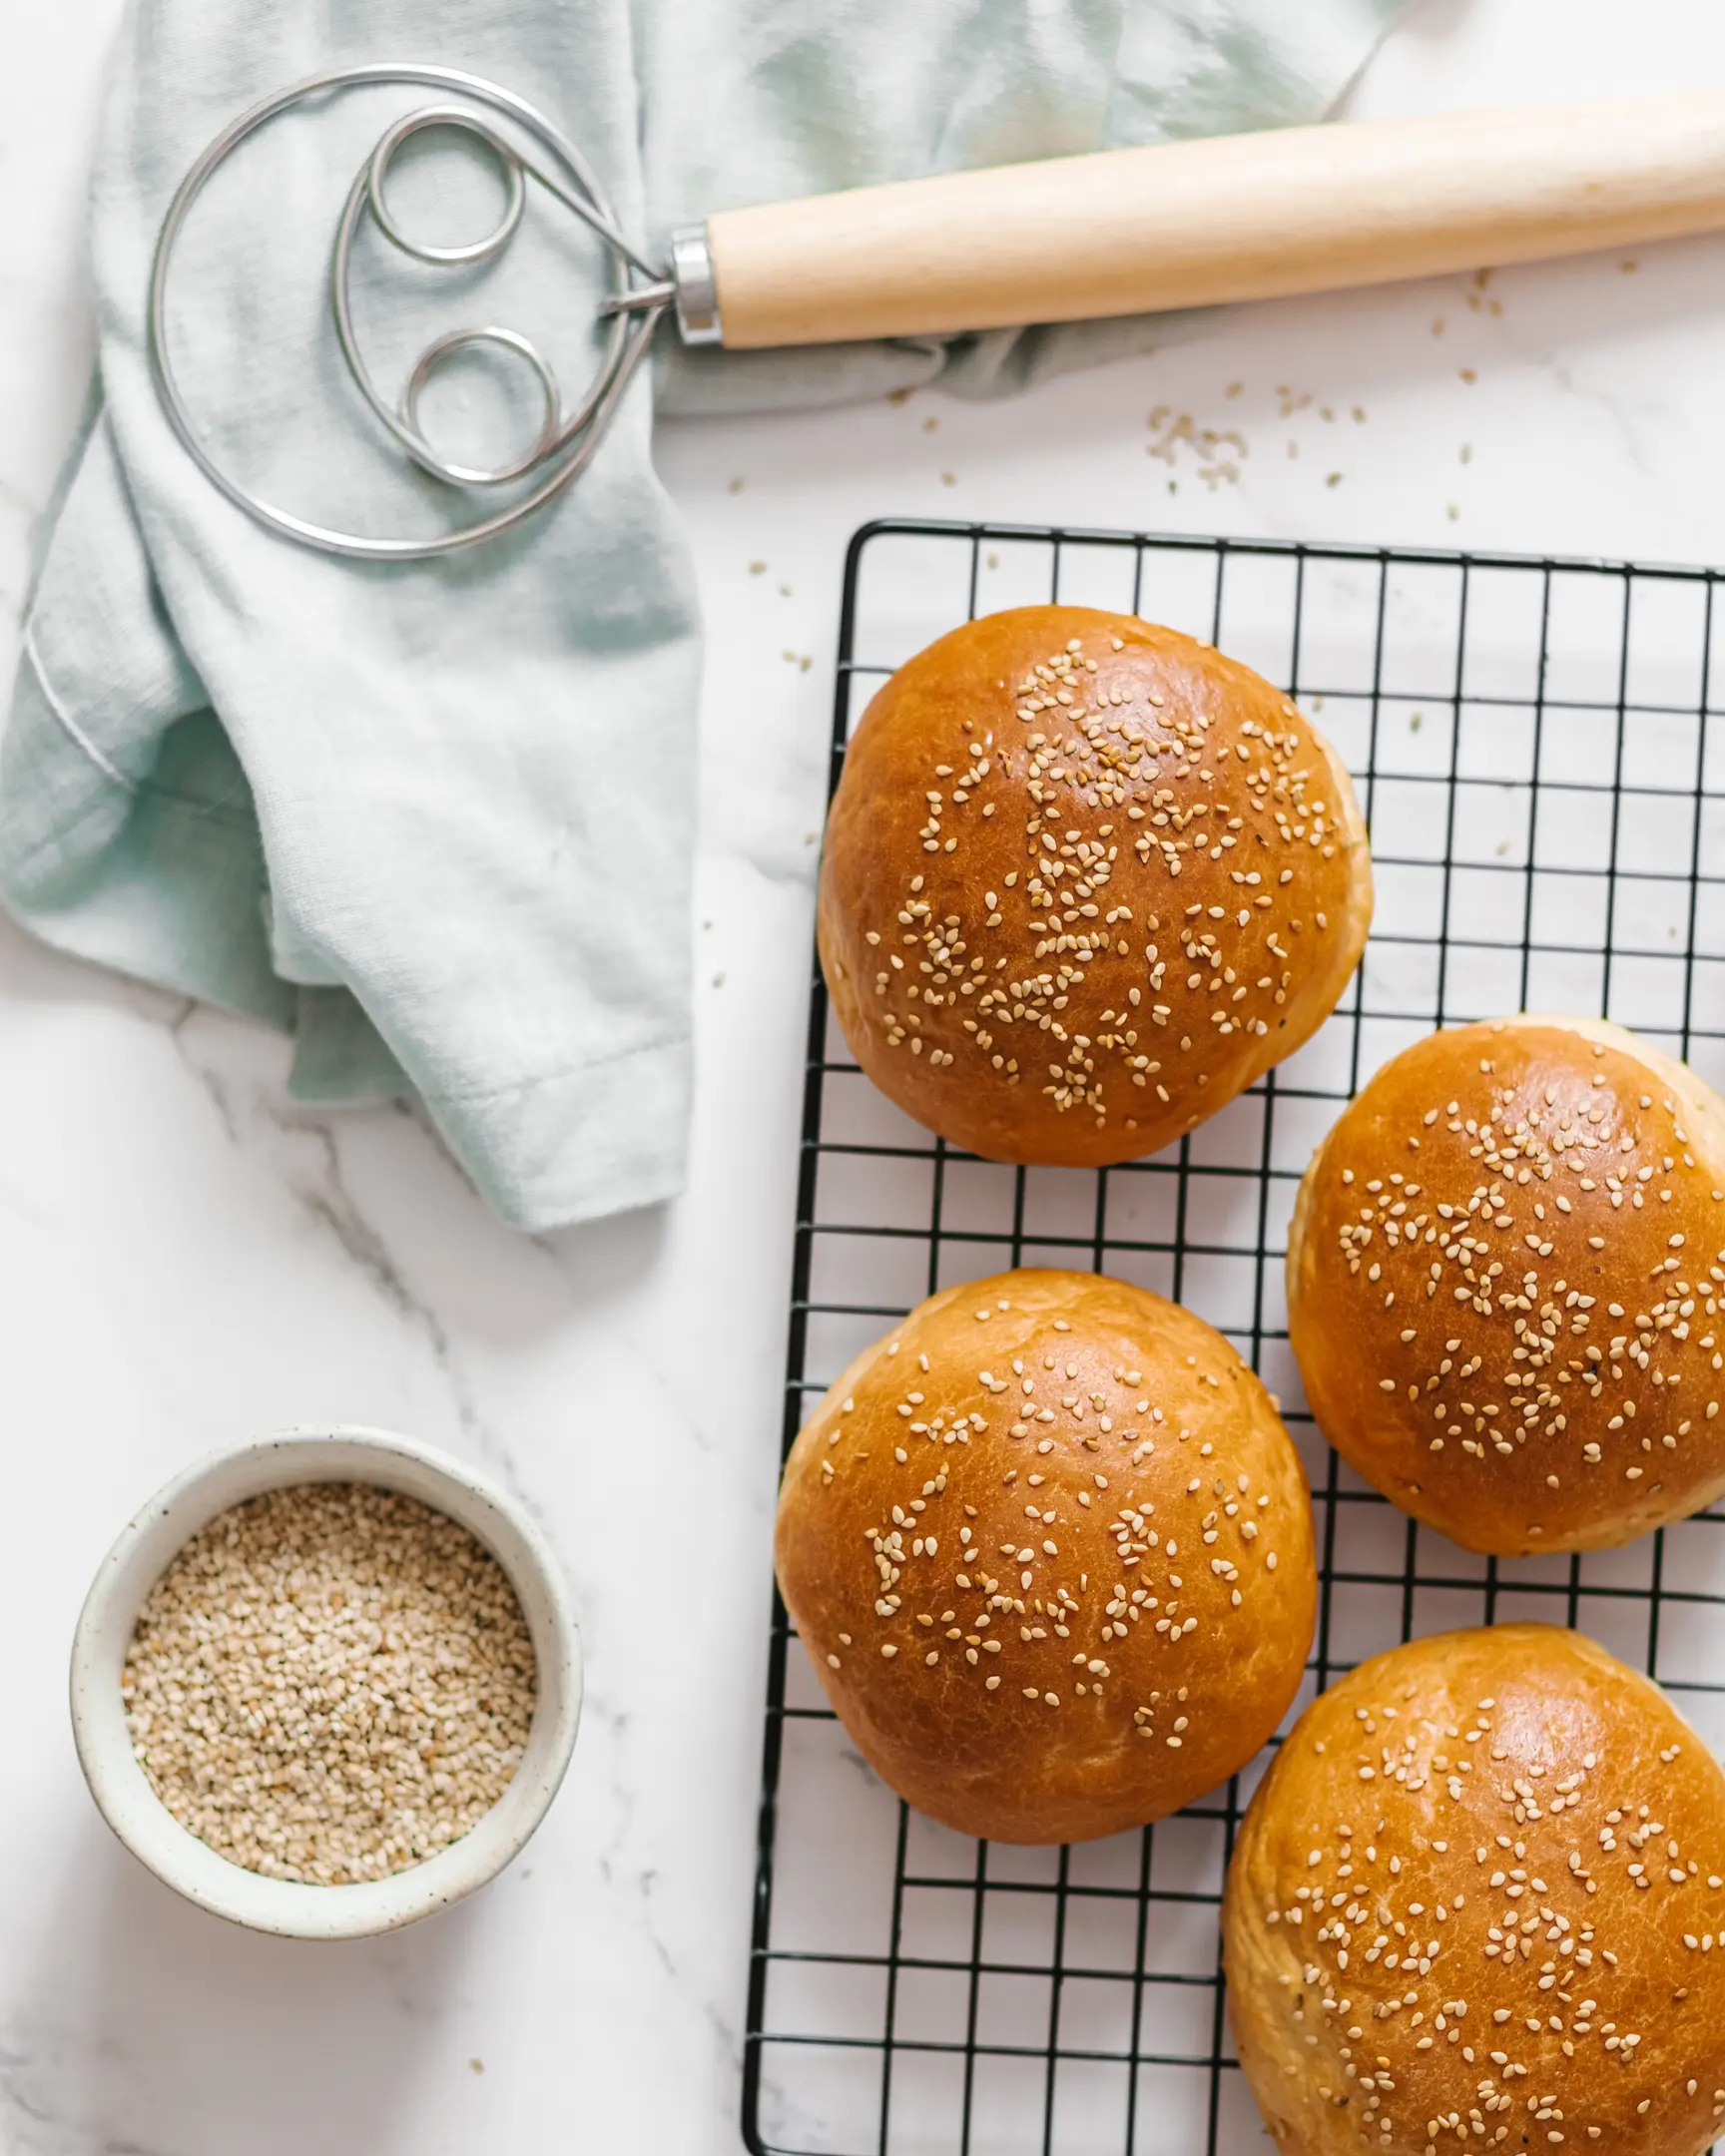 There are burger buns on a pastry rack .  There are burger buns on a pastry rack to cool. On the side of them lies a tool for mixing dough and a towel. Below the frame are sesame seeds.